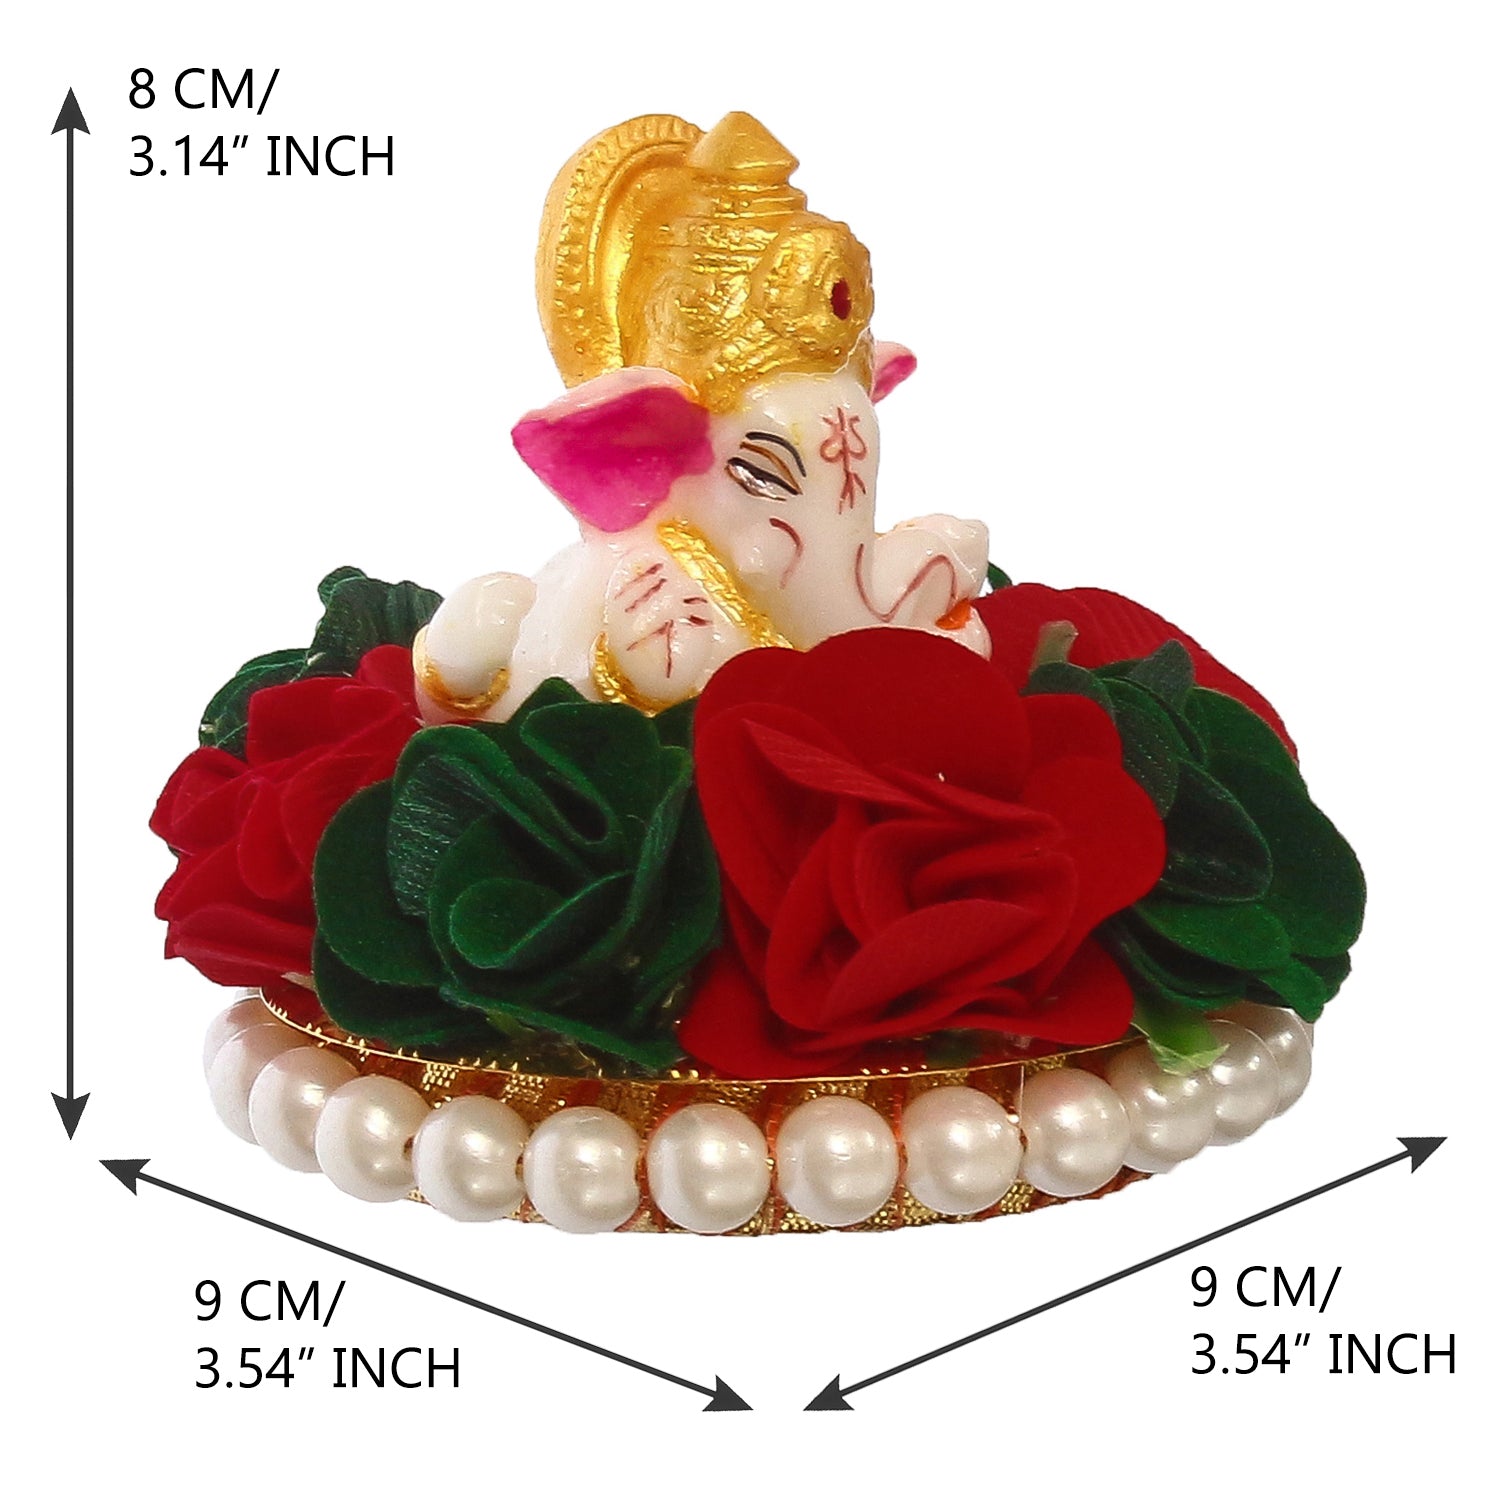 Lord Ganesha Idol on Decorative Handcrafted Plate with Colorful Flowers 3